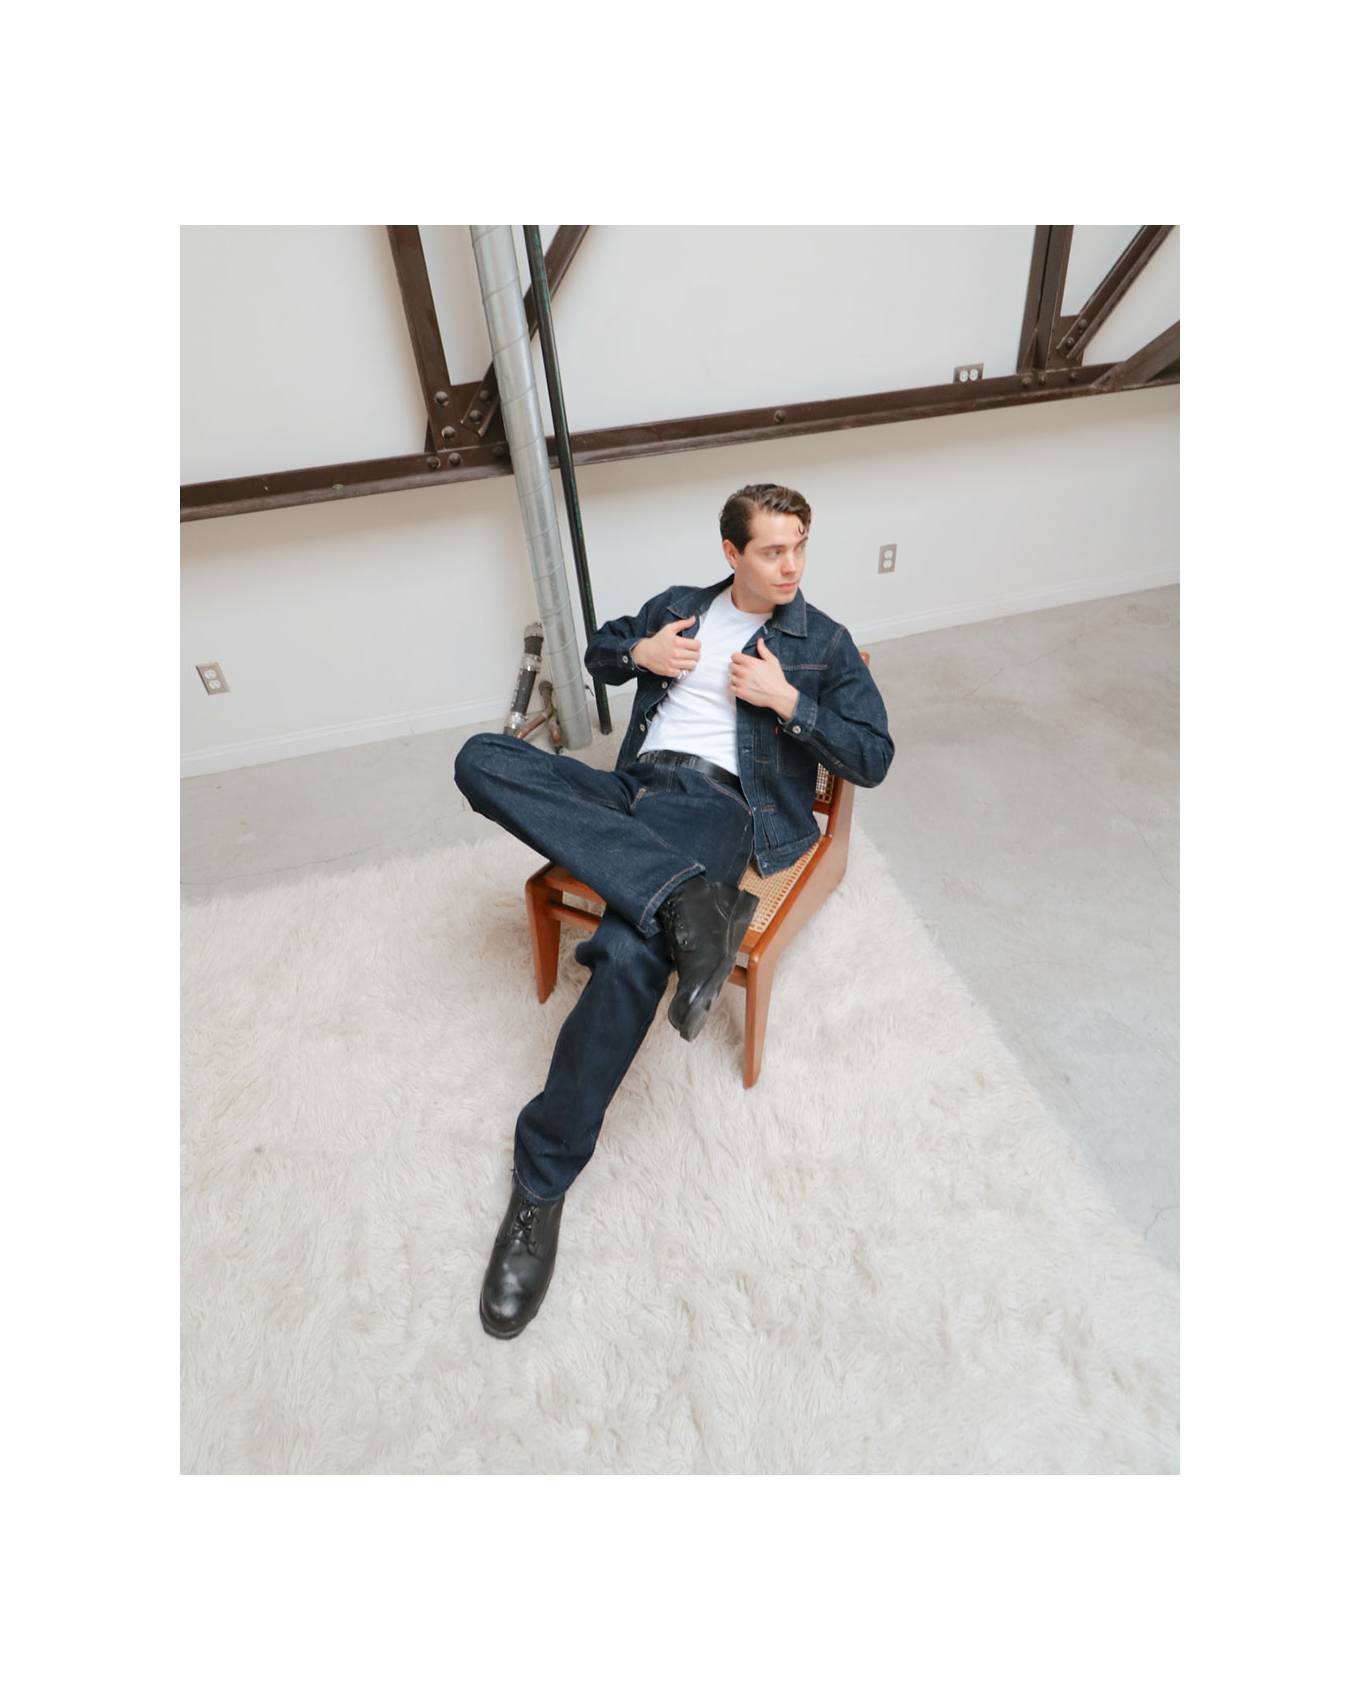 Gabe sitting on a wooden chair in an industrial room wearing jeans, matching jacket and white tee